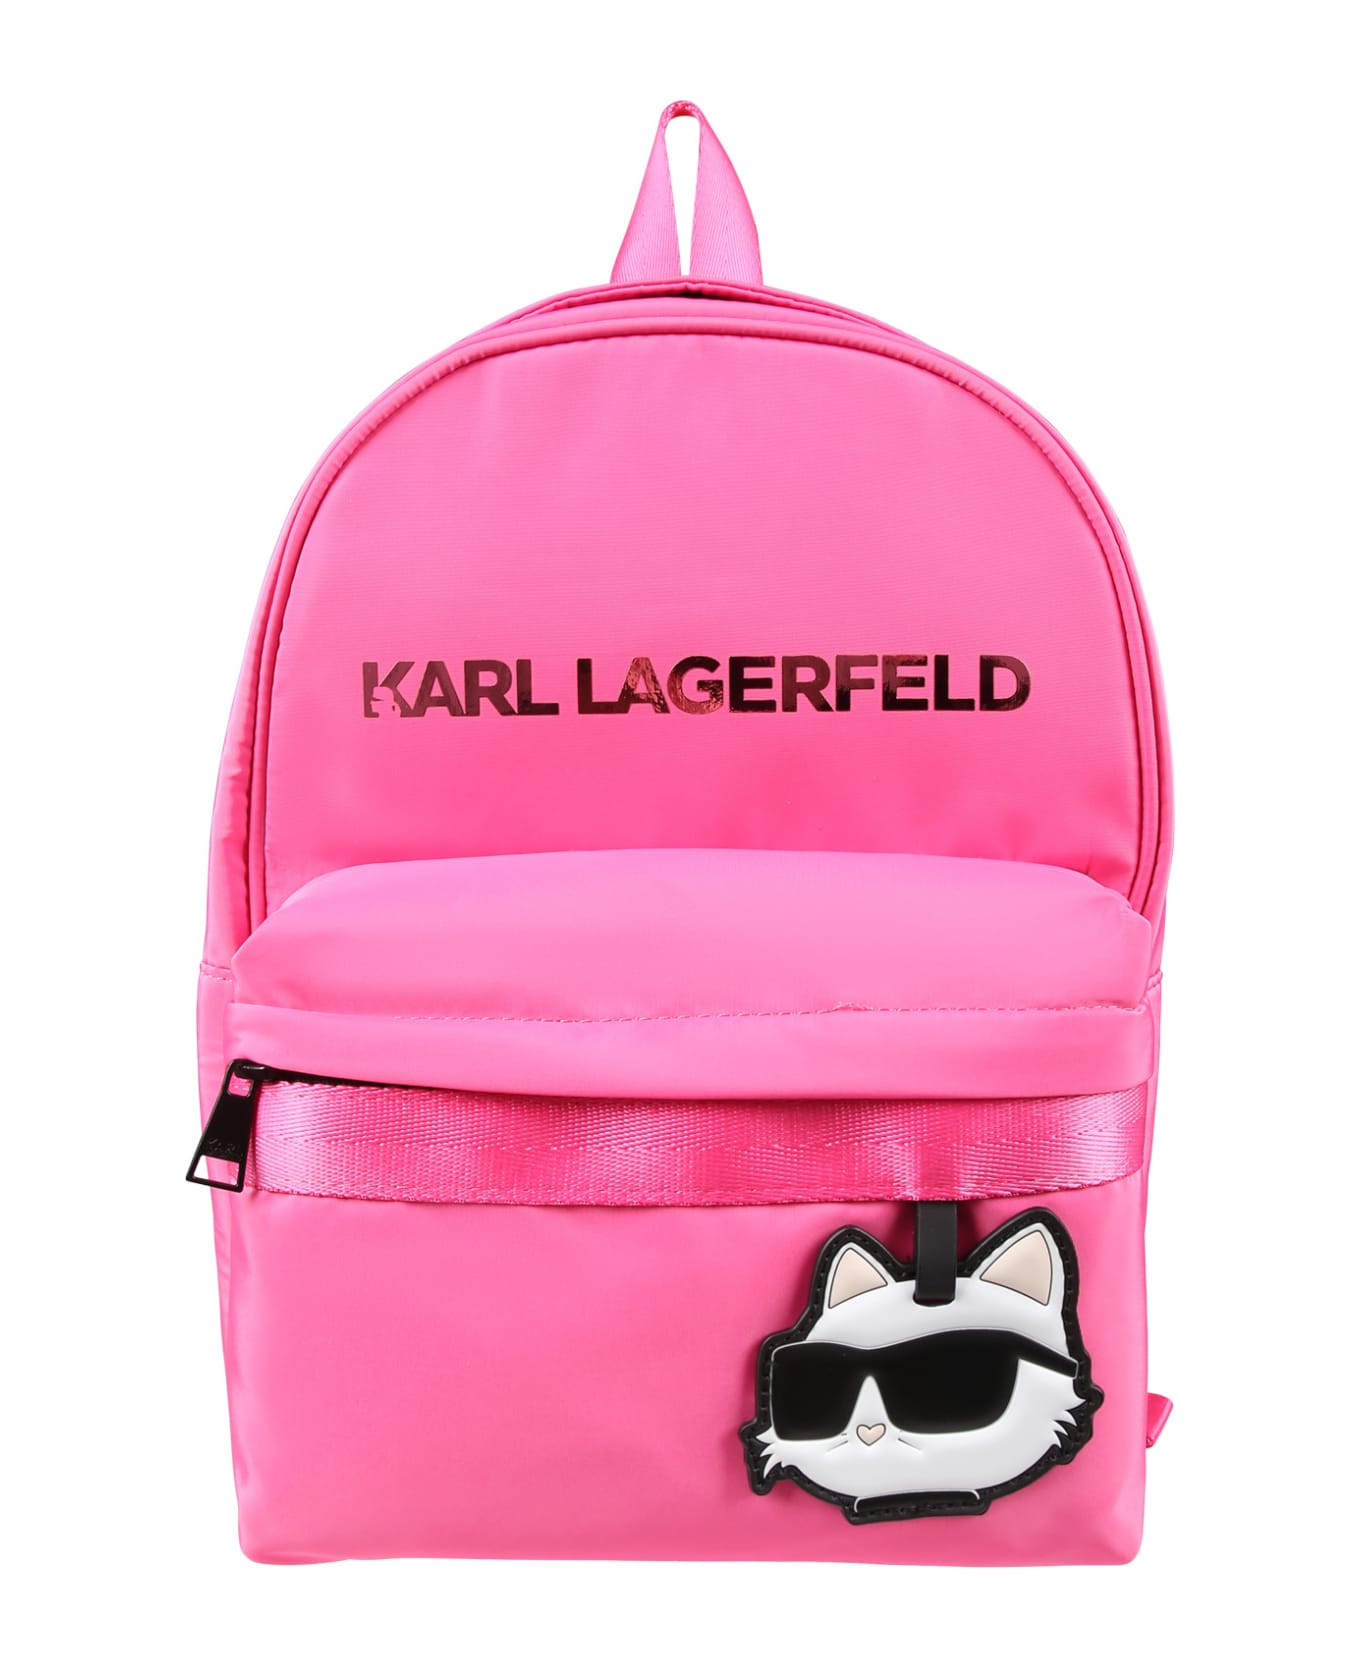 Karl Lagerfeld Kids Fuchsia Backpack For Girl With Logo And Choupette - Fuchsia アクセサリー＆ギフト